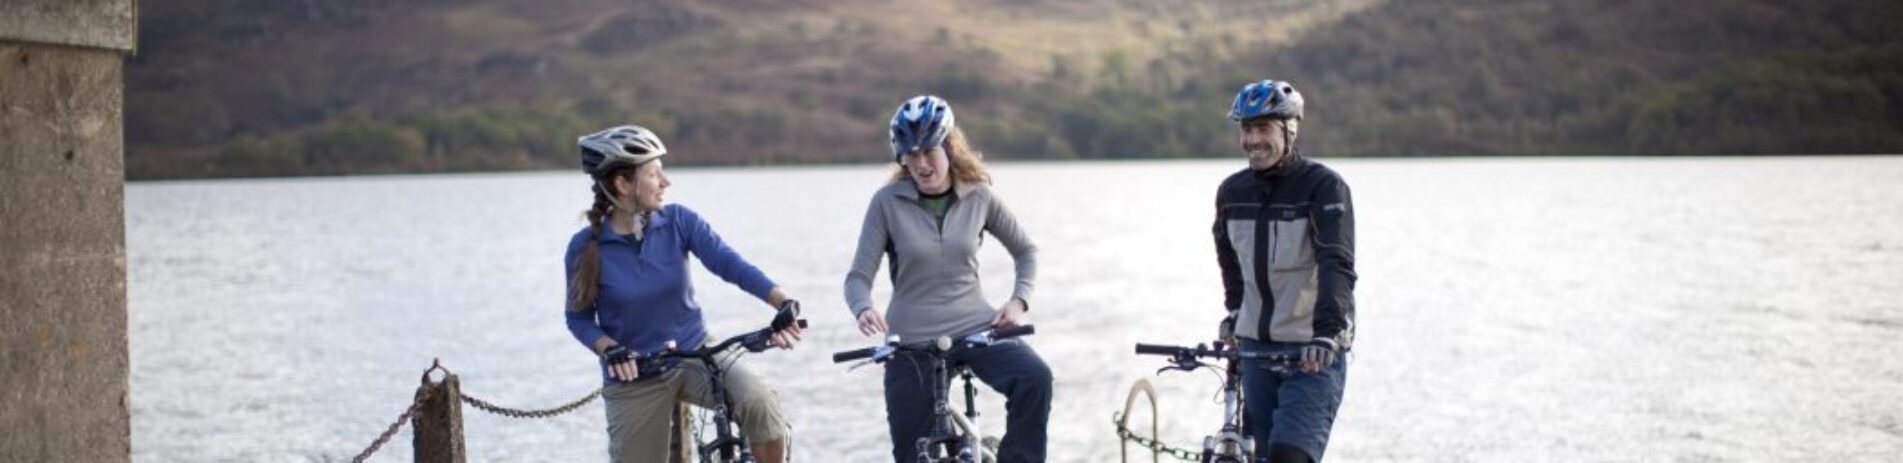 three-cyclists-on-bikes-with-helmets-on-at-edge-of-pier-with-loch-behind-them